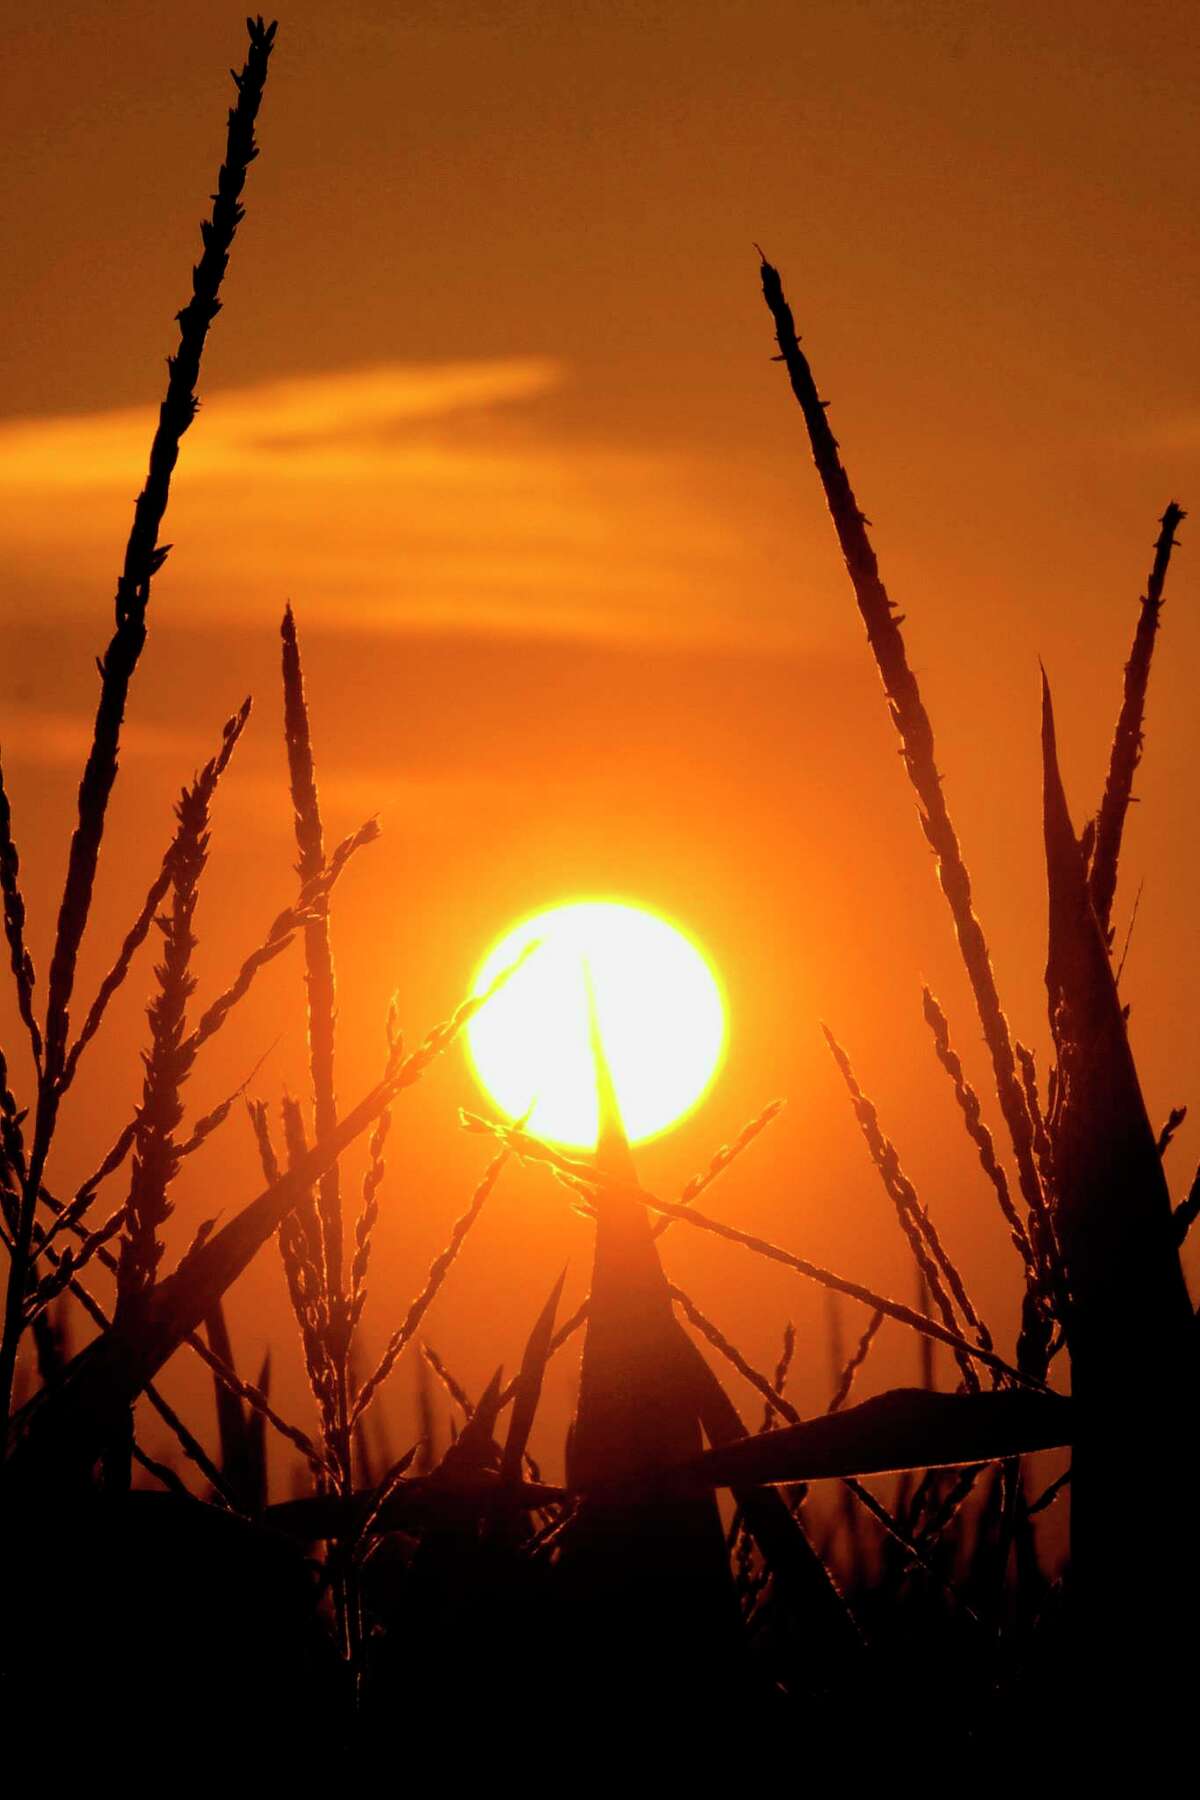 ADVANCE FOR USE TUESDAY, MARCH 19, 2019 AND THEREAFTER-FILE - In this July 15, 2012 file photo, the sun rises over corn stalks in Pleasant Plains, Ill., during a drought. An AP data analysis of records from 1999-2019 shows that in weather stations across America, hot records are being set twice as often as cold ones.